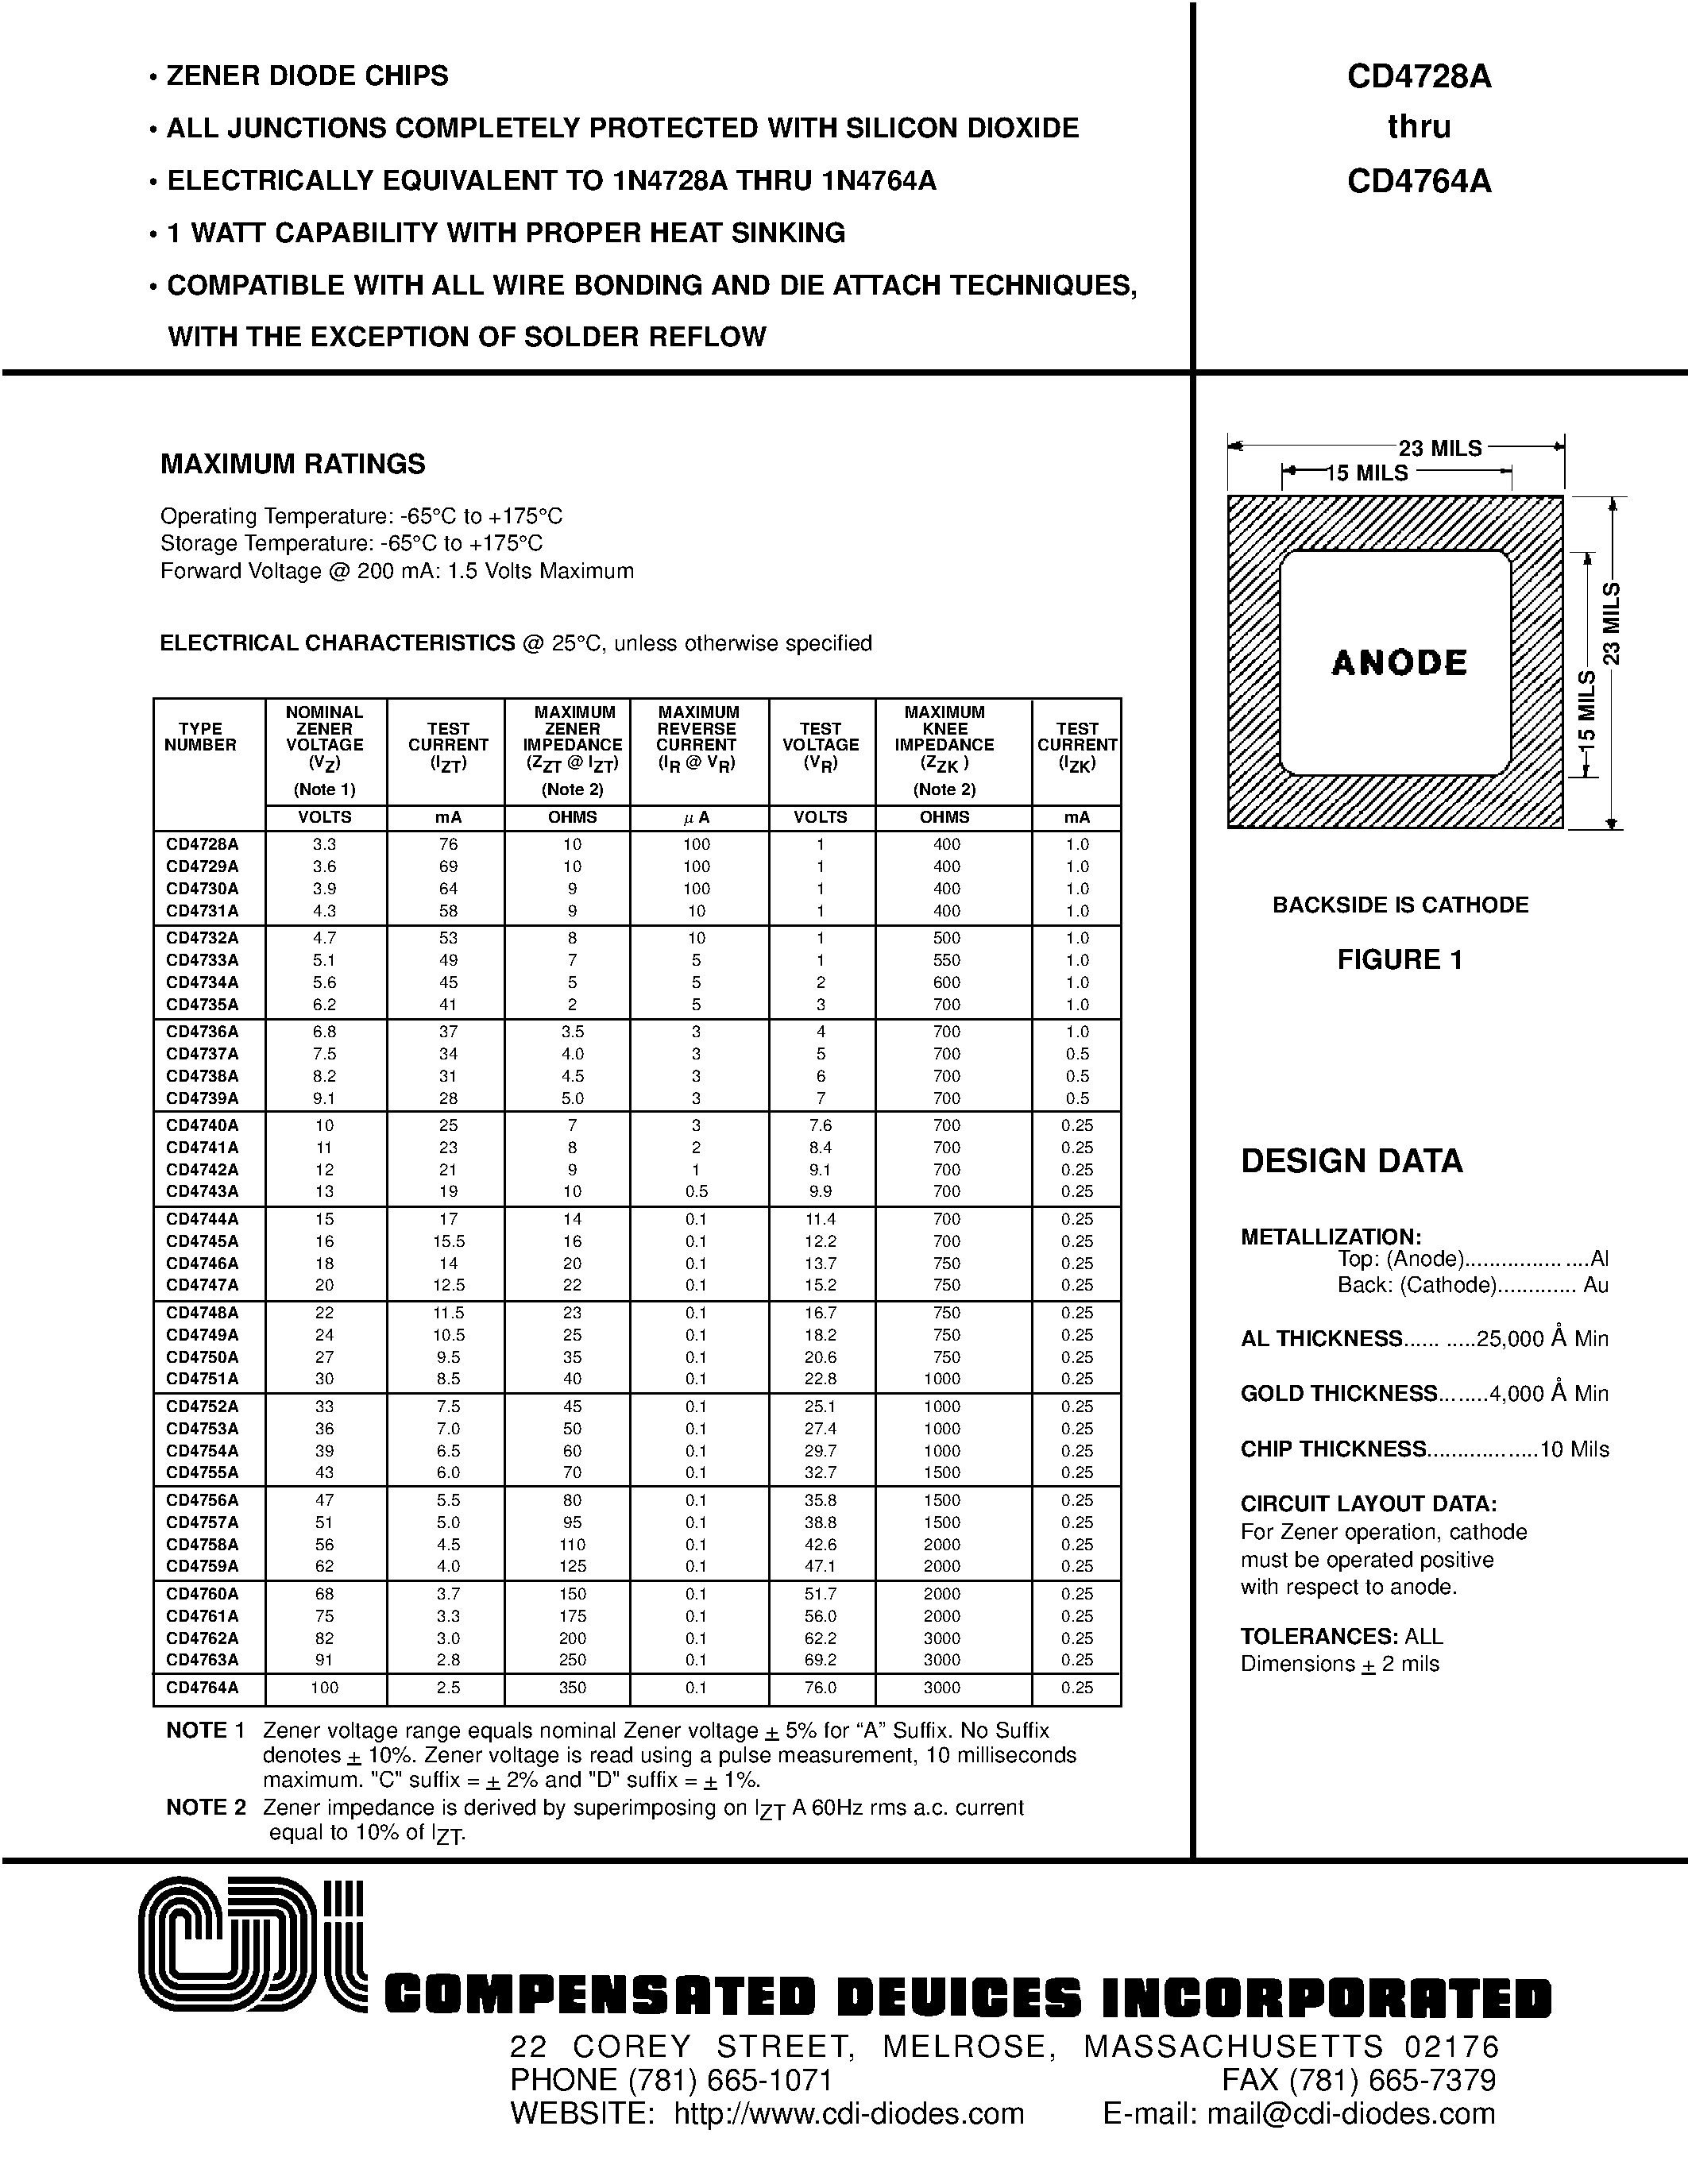 Datasheet CD4745A - ZENER DIODE CHIPS page 1